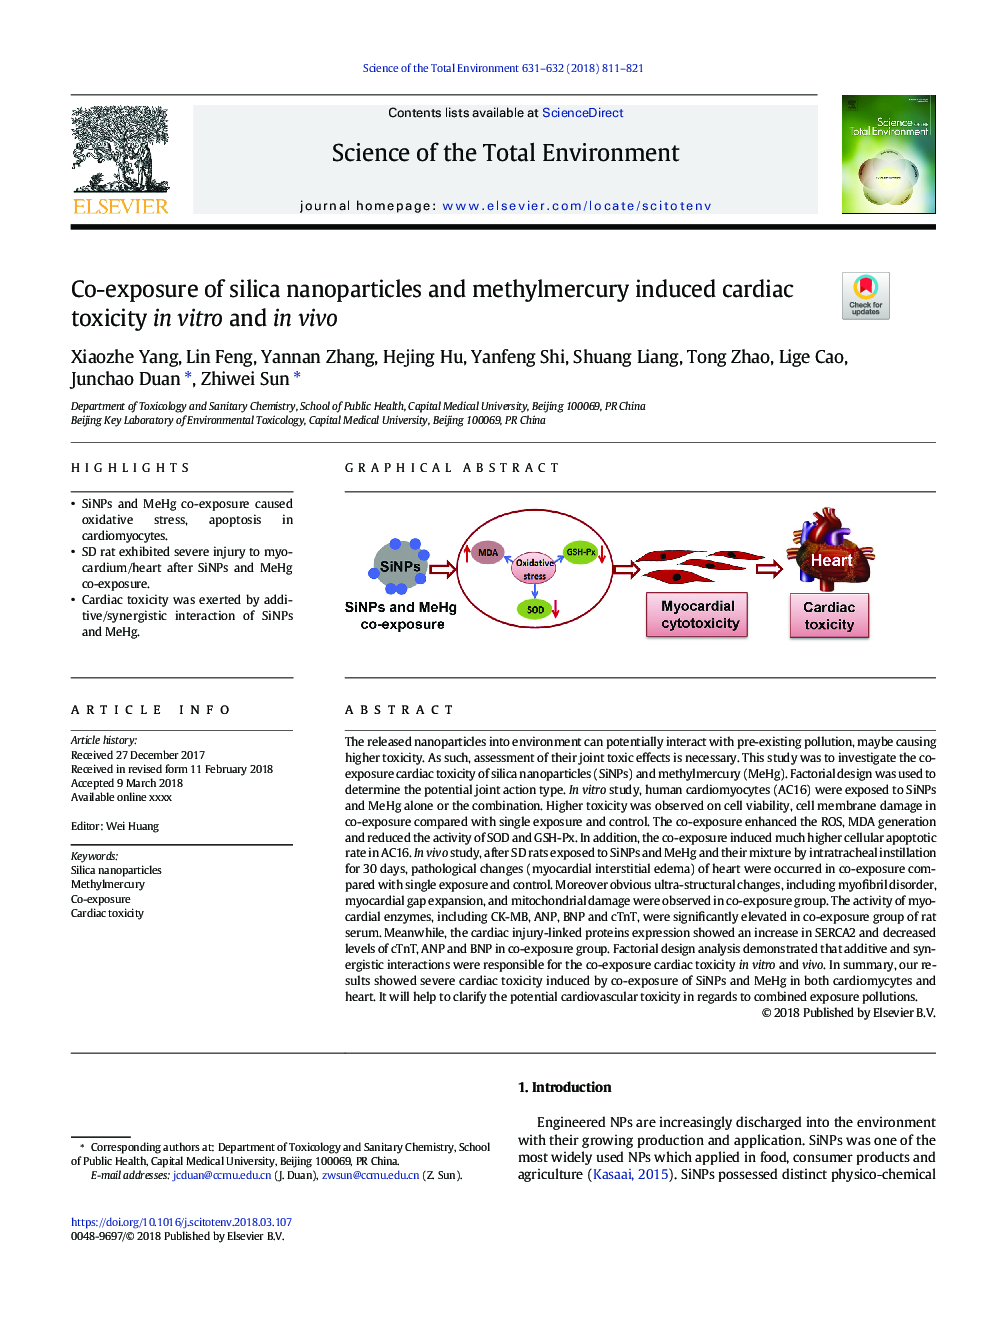 Co-exposure of silica nanoparticles and methylmercury induced cardiac toxicity in vitro and in vivo